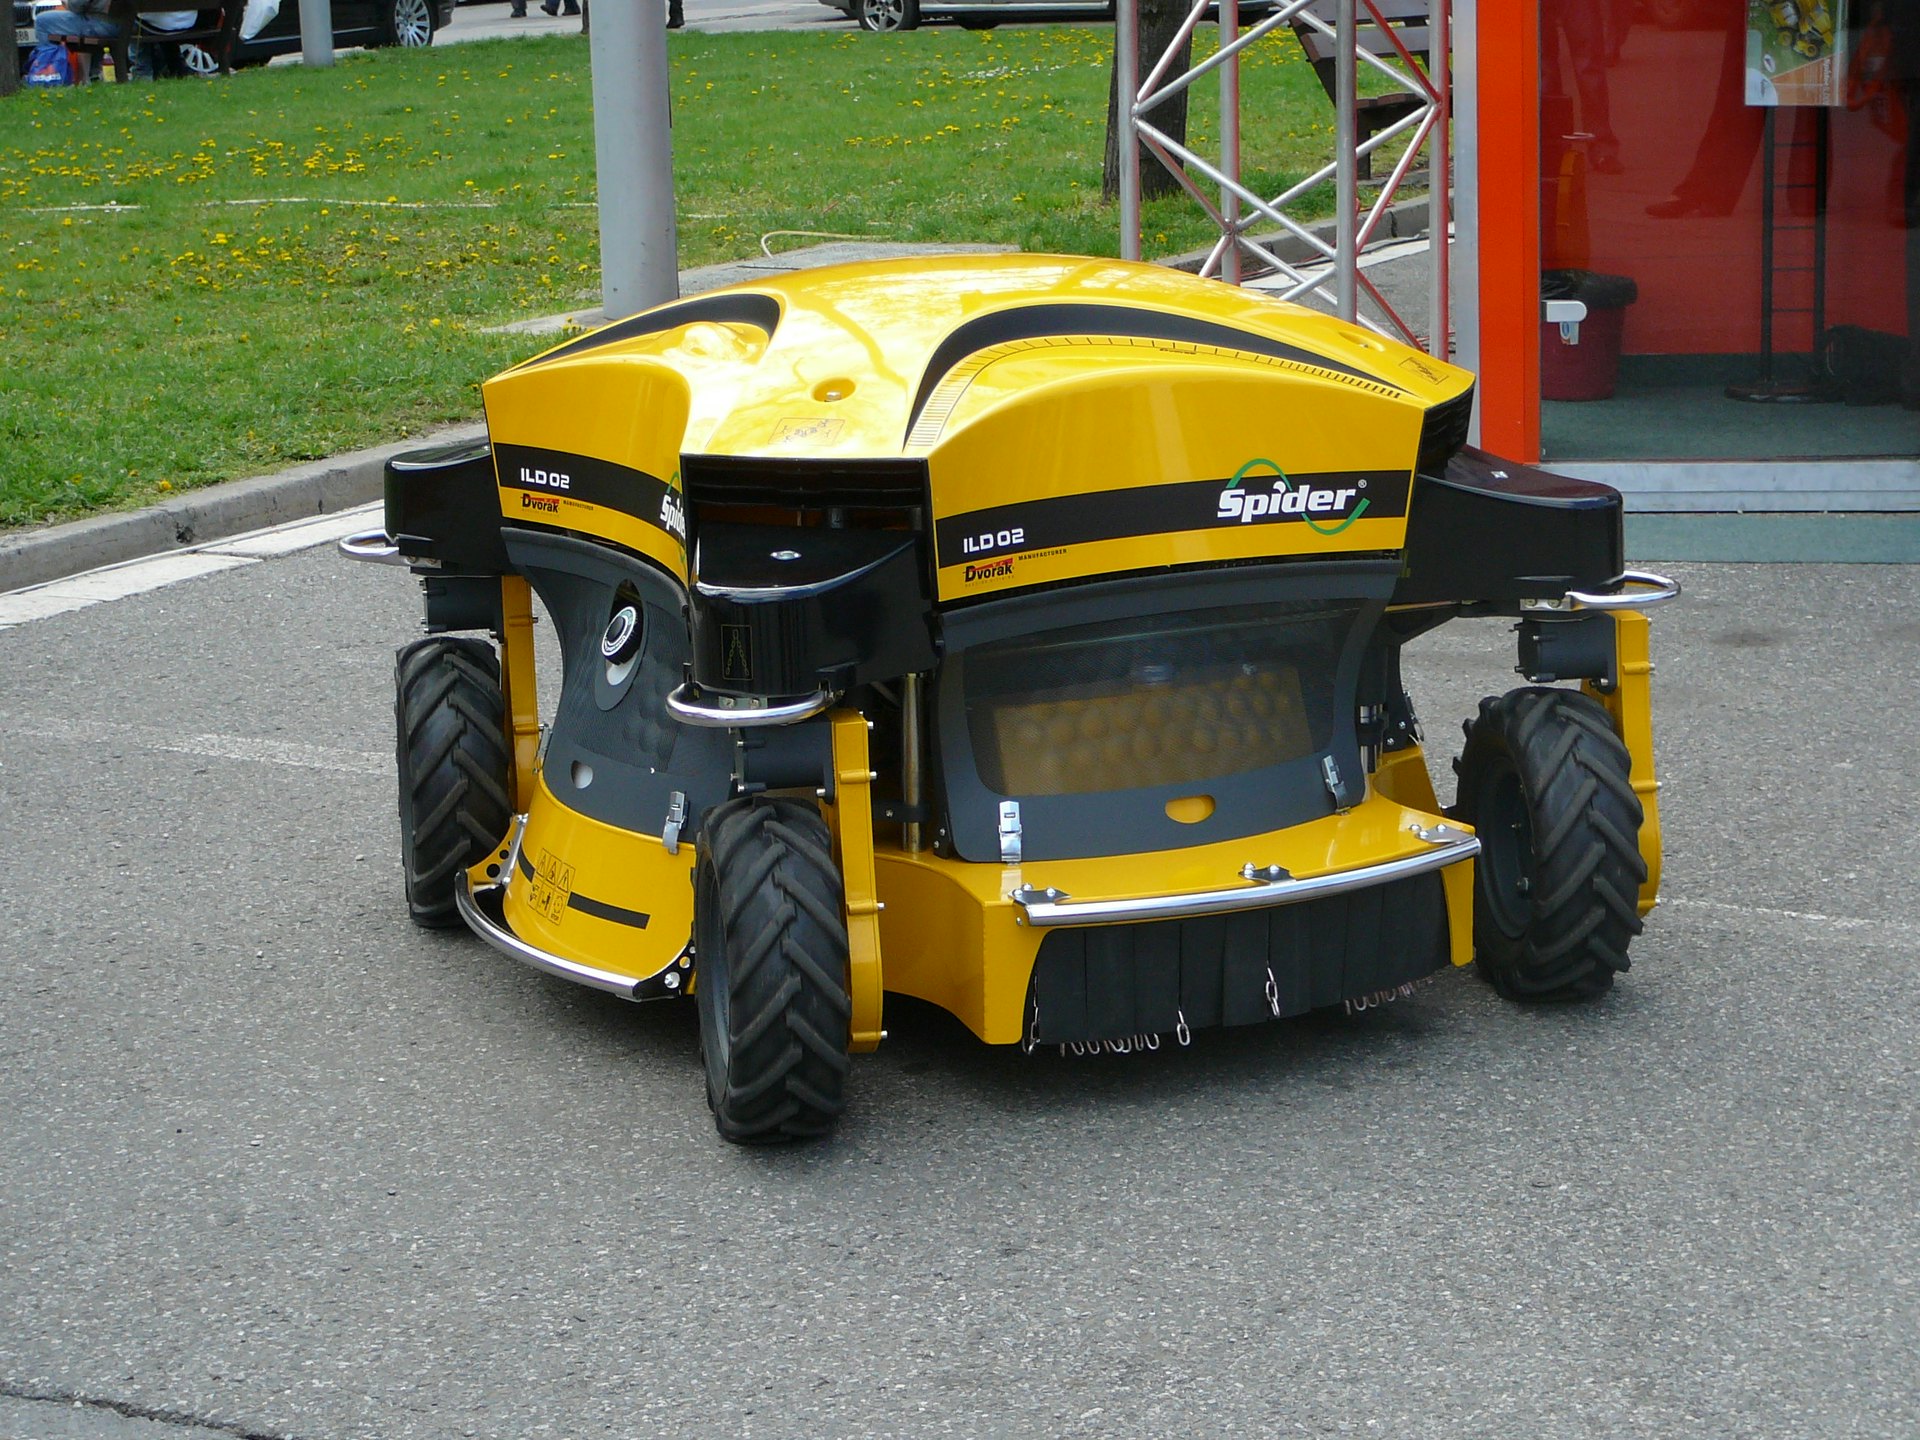 European Tracked Mower Designed for Dangerous Mowing Conditions